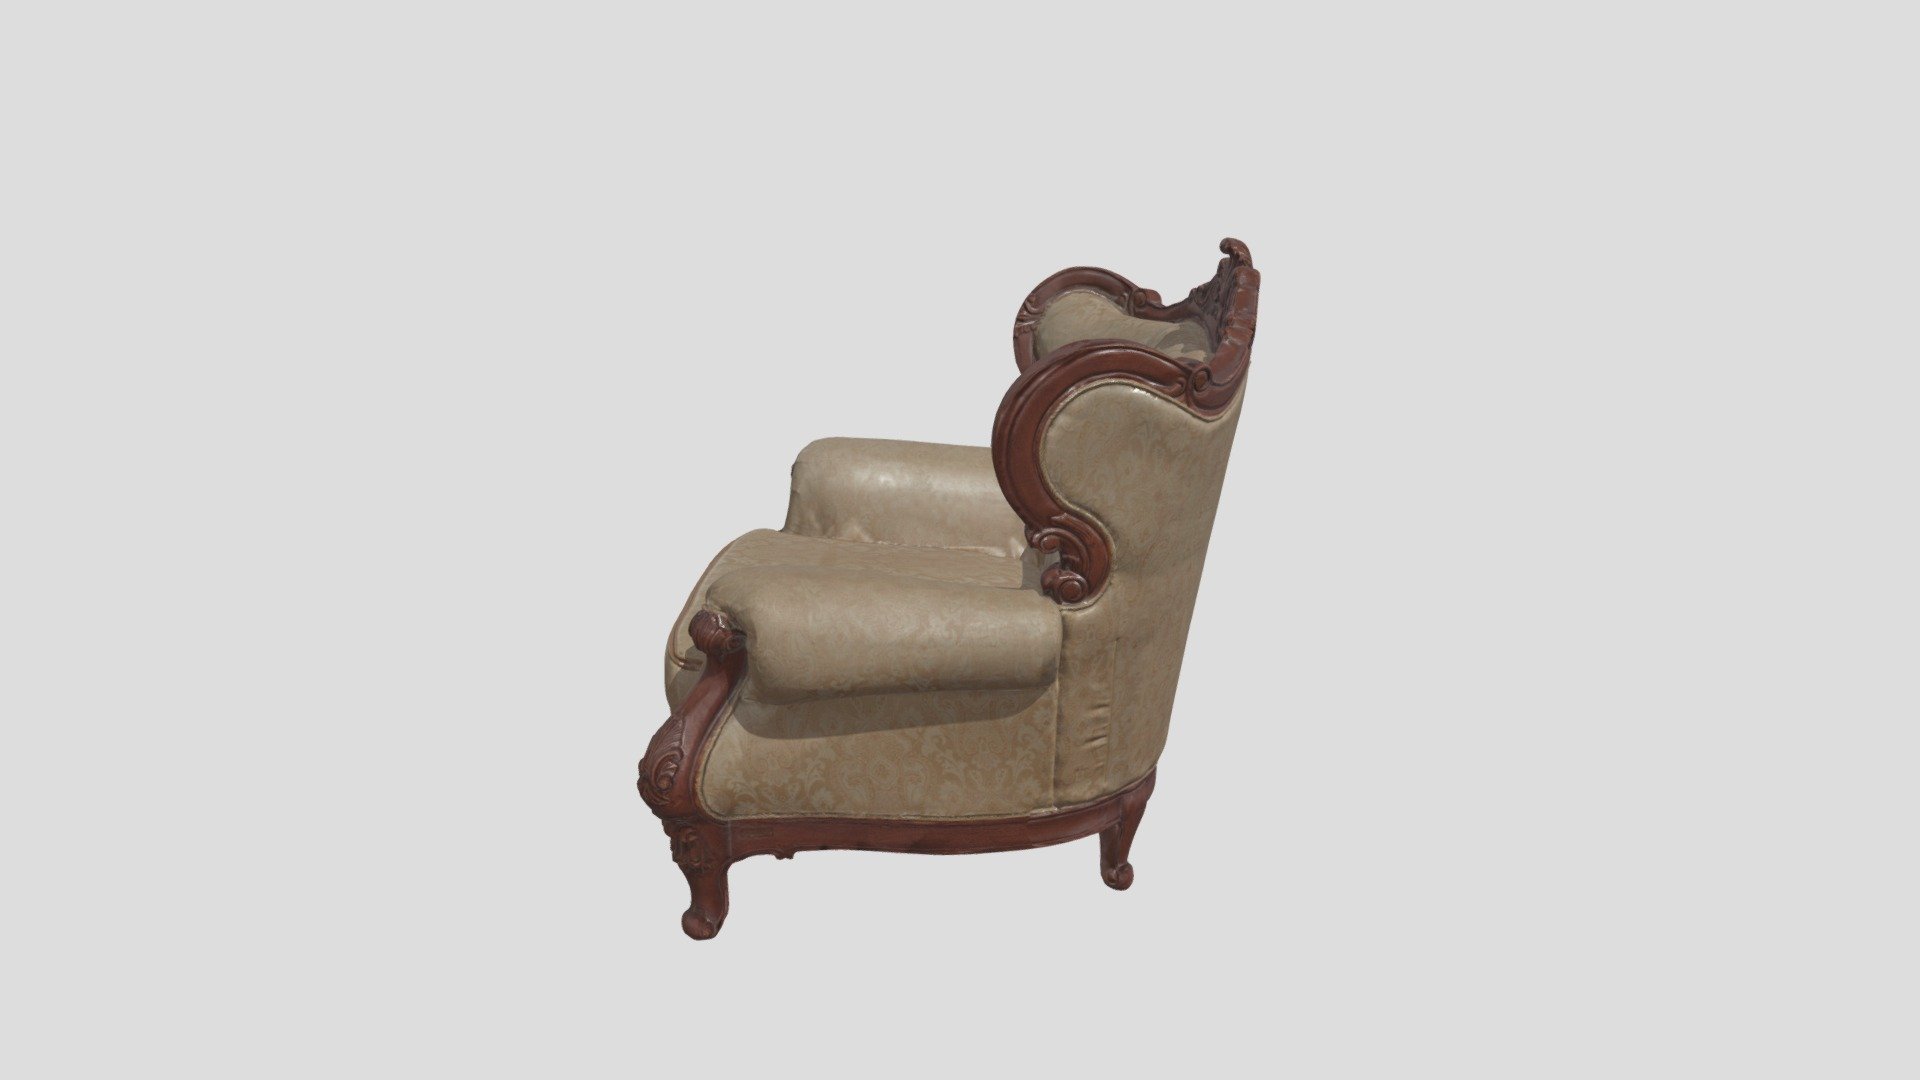 Texture resolution 2k Texture format JPG Model accuracy LOD 0-5 - Antique sofa VR / AR / low-poly 3d model - Buy Royalty Free 3D model by Now studio (@interessante) 3d model